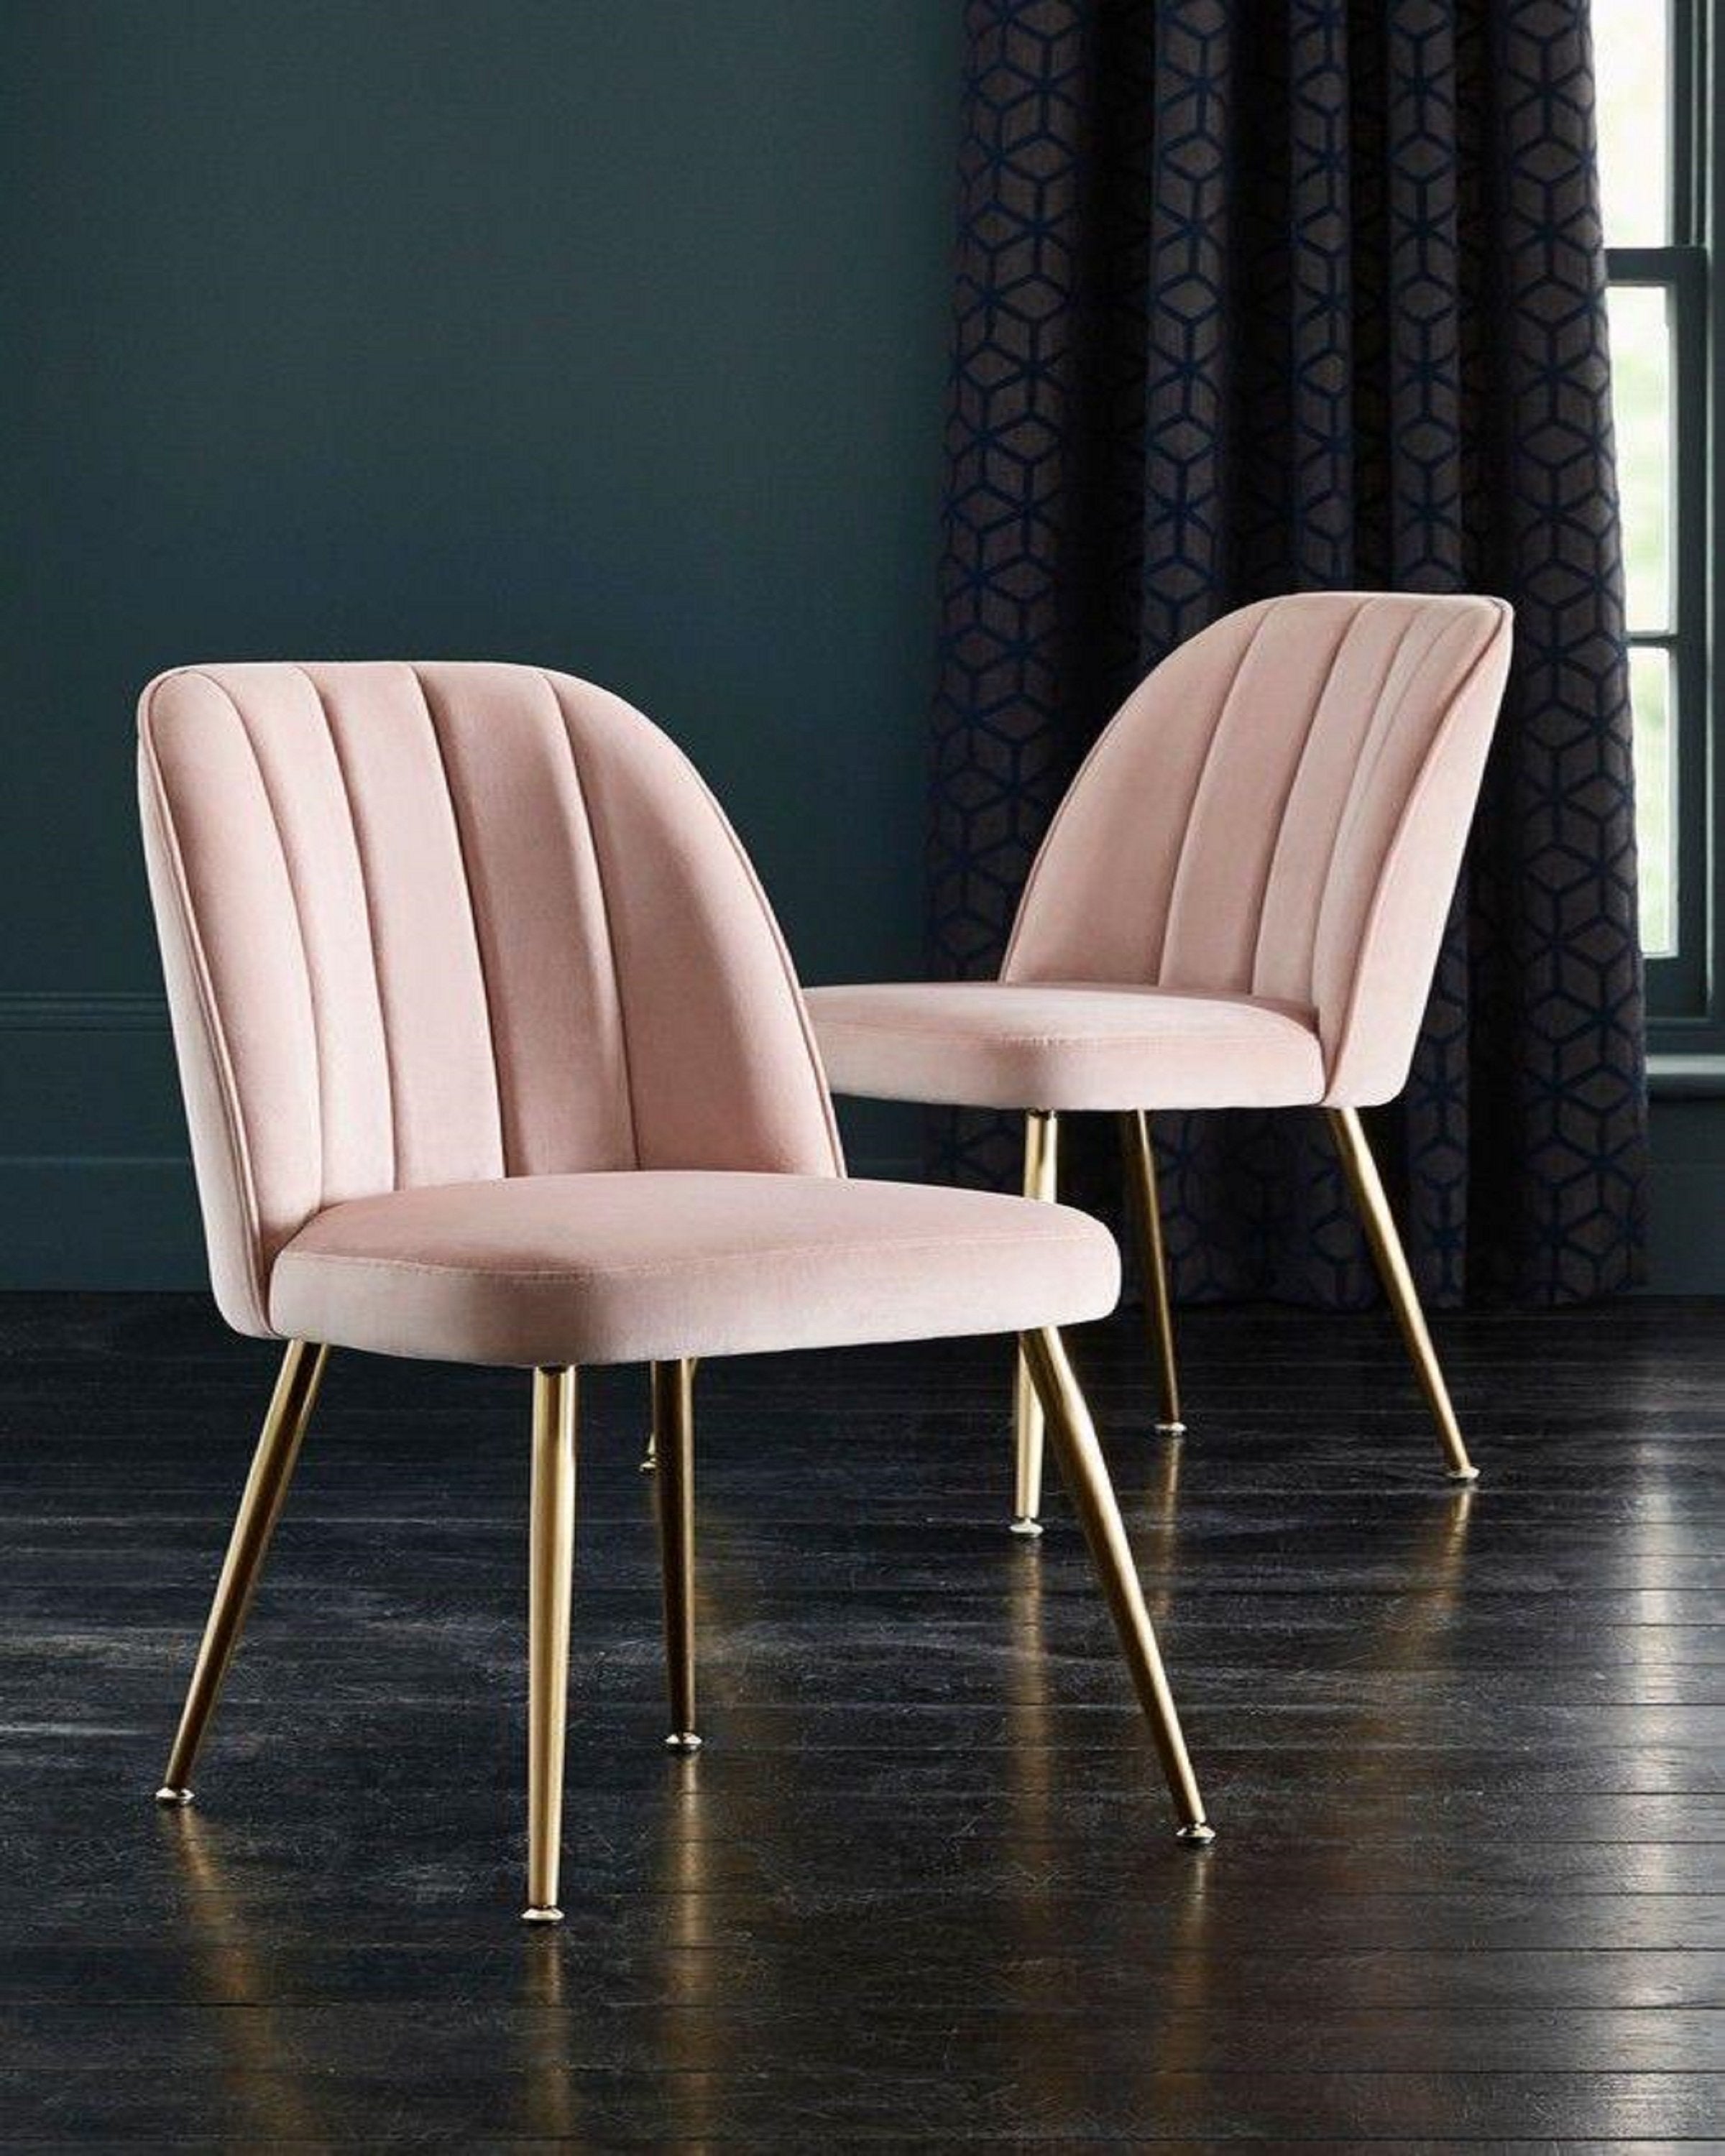 Luxury pink chair